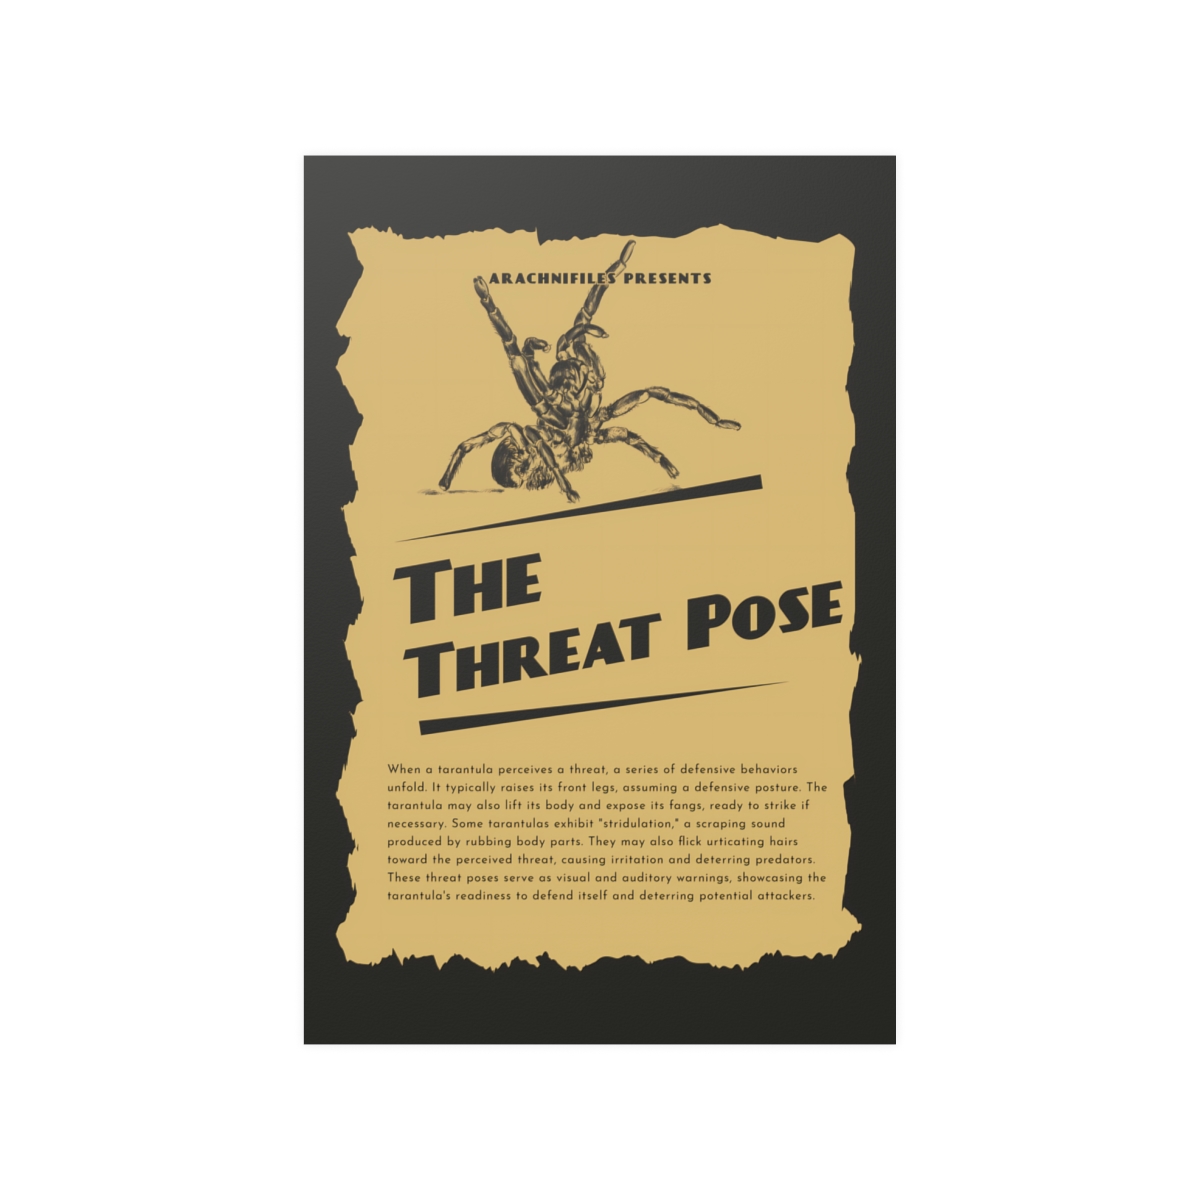 Pose A Threat synonyms - 263 Words and Phrases for Pose A Threat